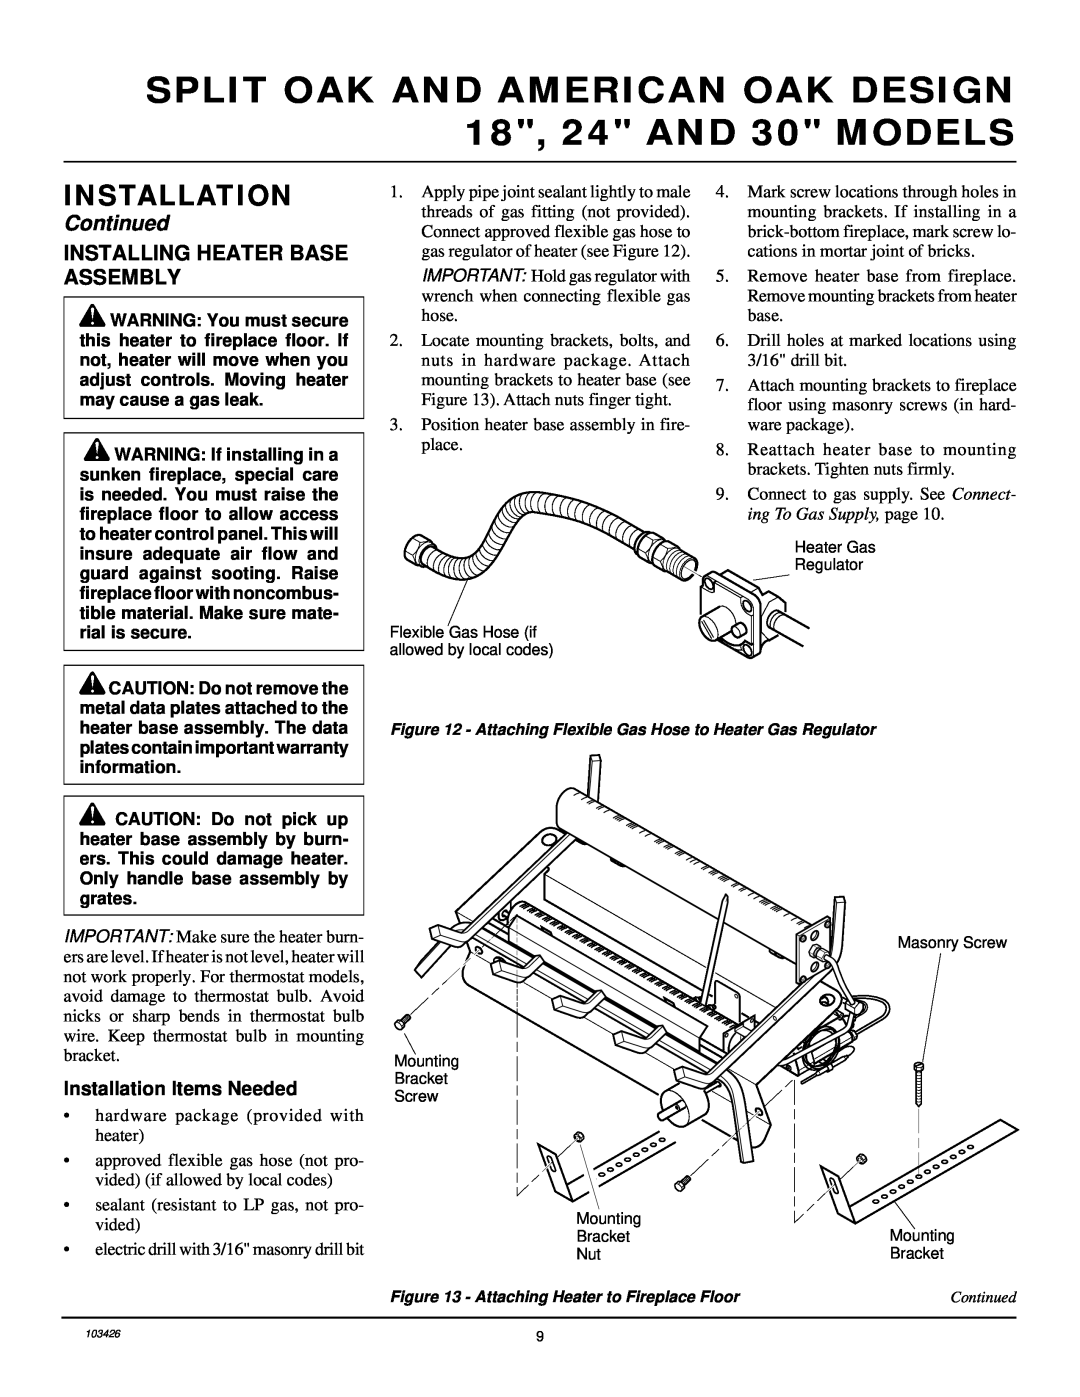 Desa 103426-01 installation manual Installing Heater Base Assembly, Installation Items Needed, Continued 